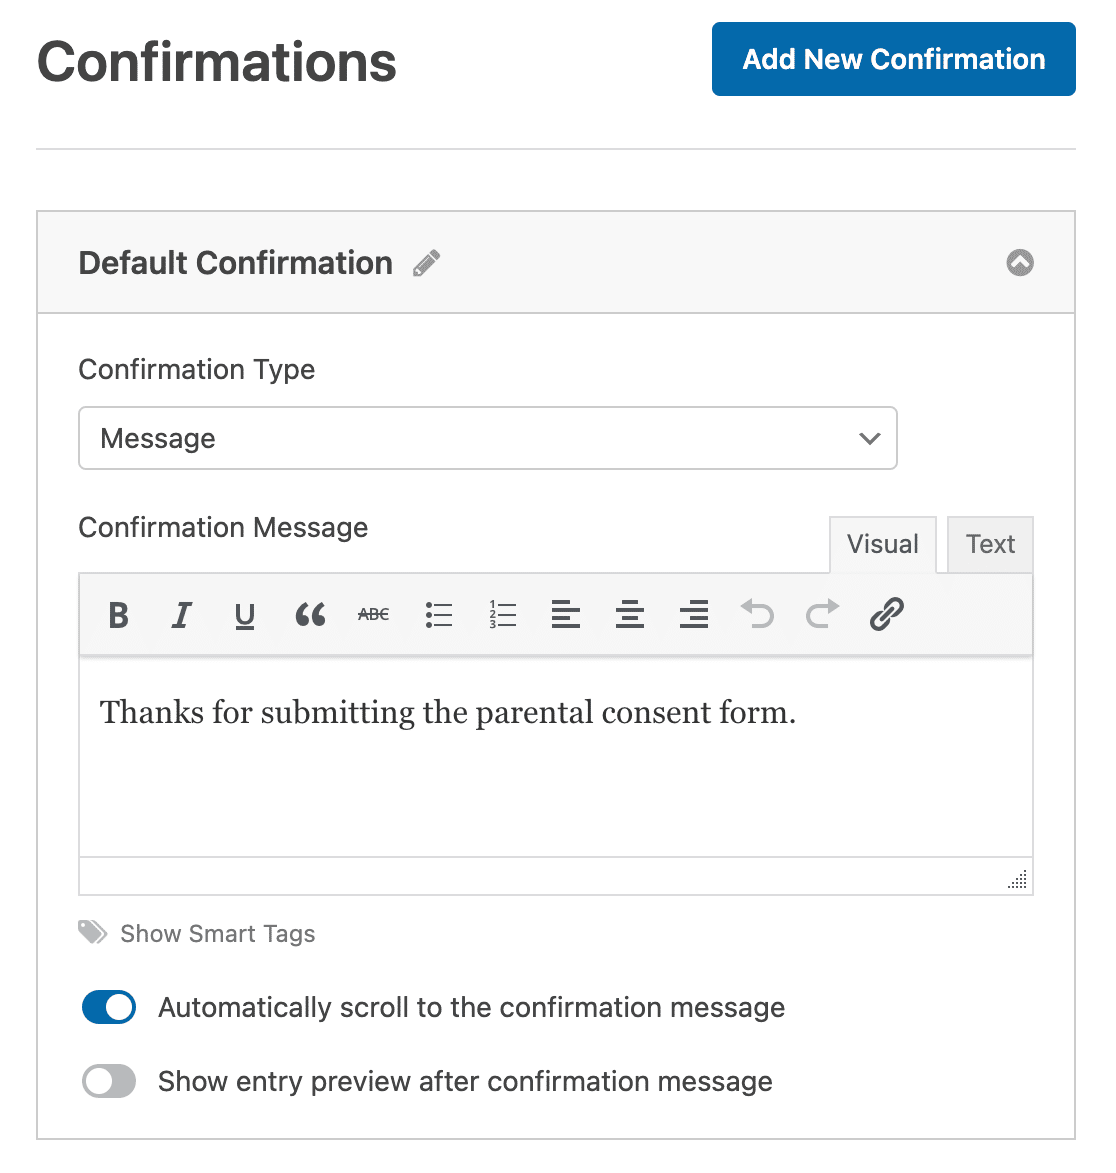 Customizing the confirmation message for a parental consent form